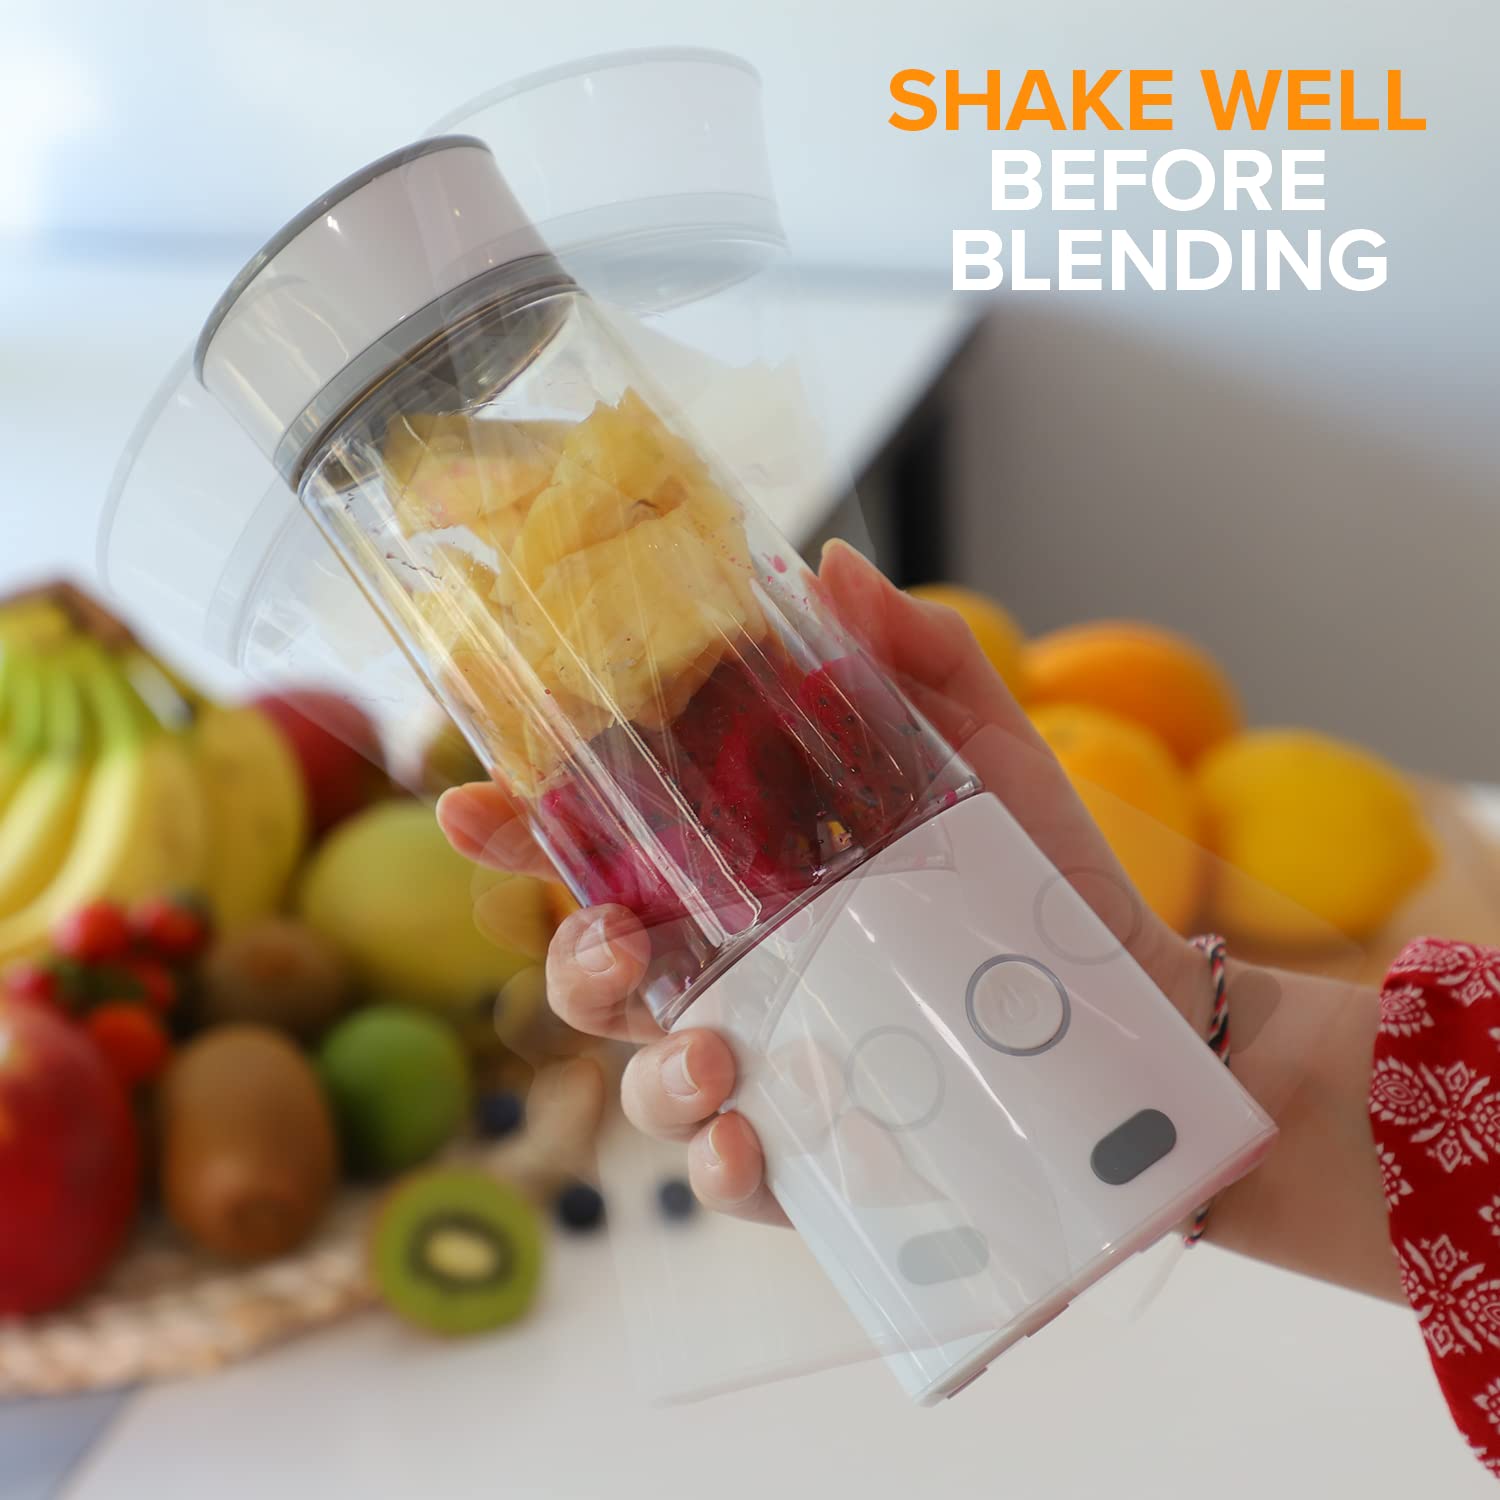 KoreJetPulse Portable Blender - 6-Blade Stainless Steel, BPA-Free, 400ml Capacity, Lightweight, Easy to Use, Perfect for Smoothies and Frozen Drinks